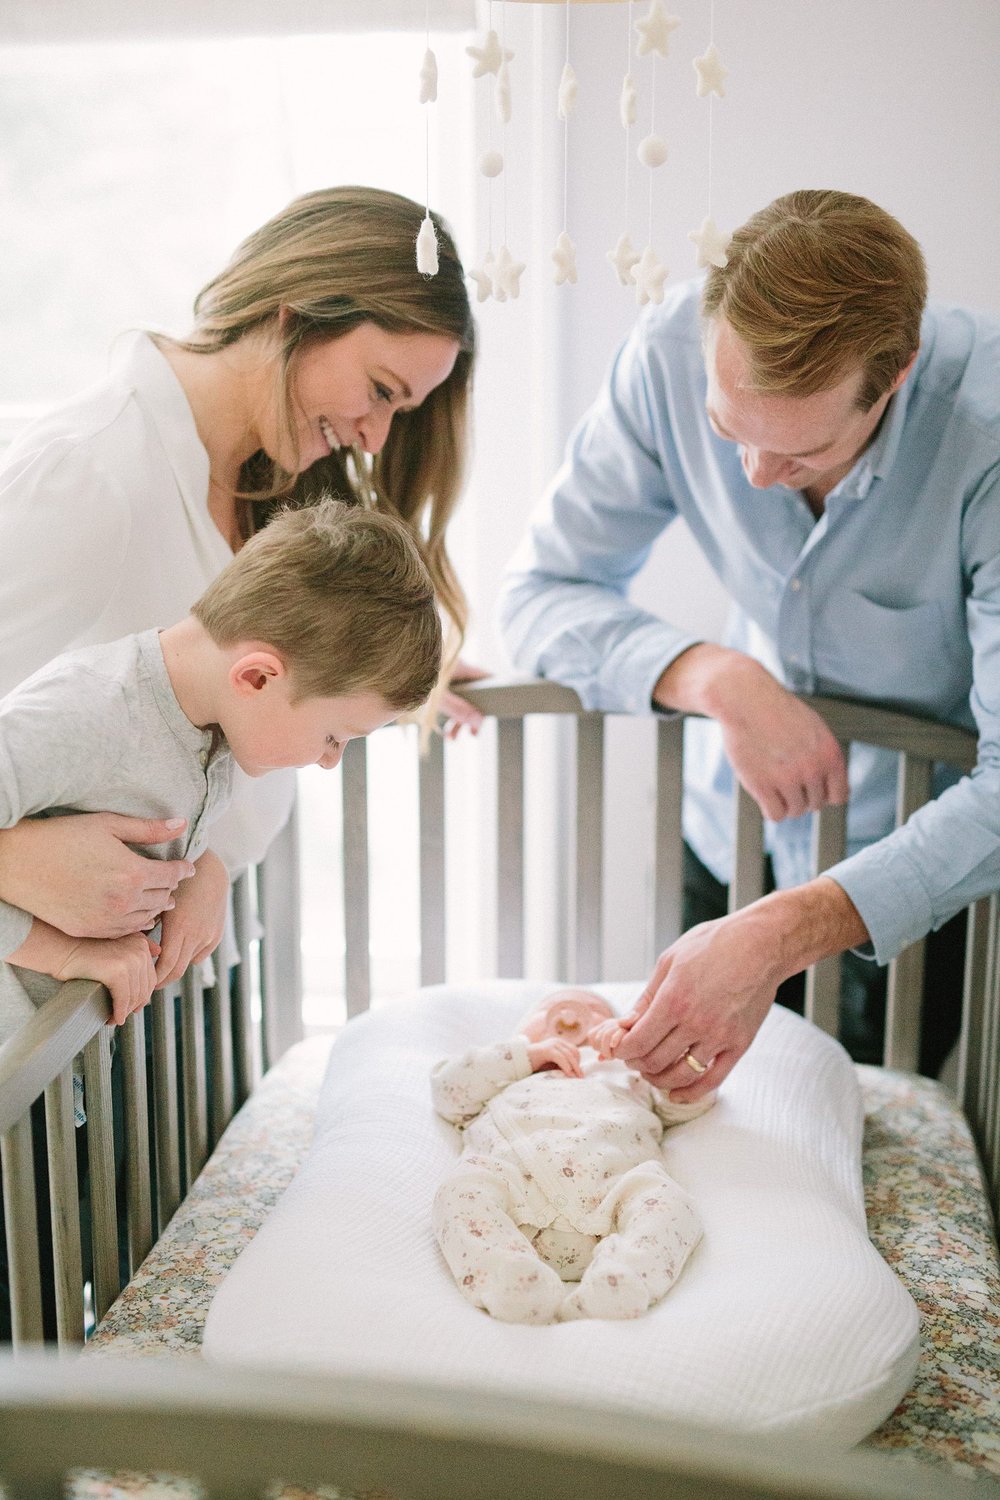 the whole family looking in on newborn baby in crib